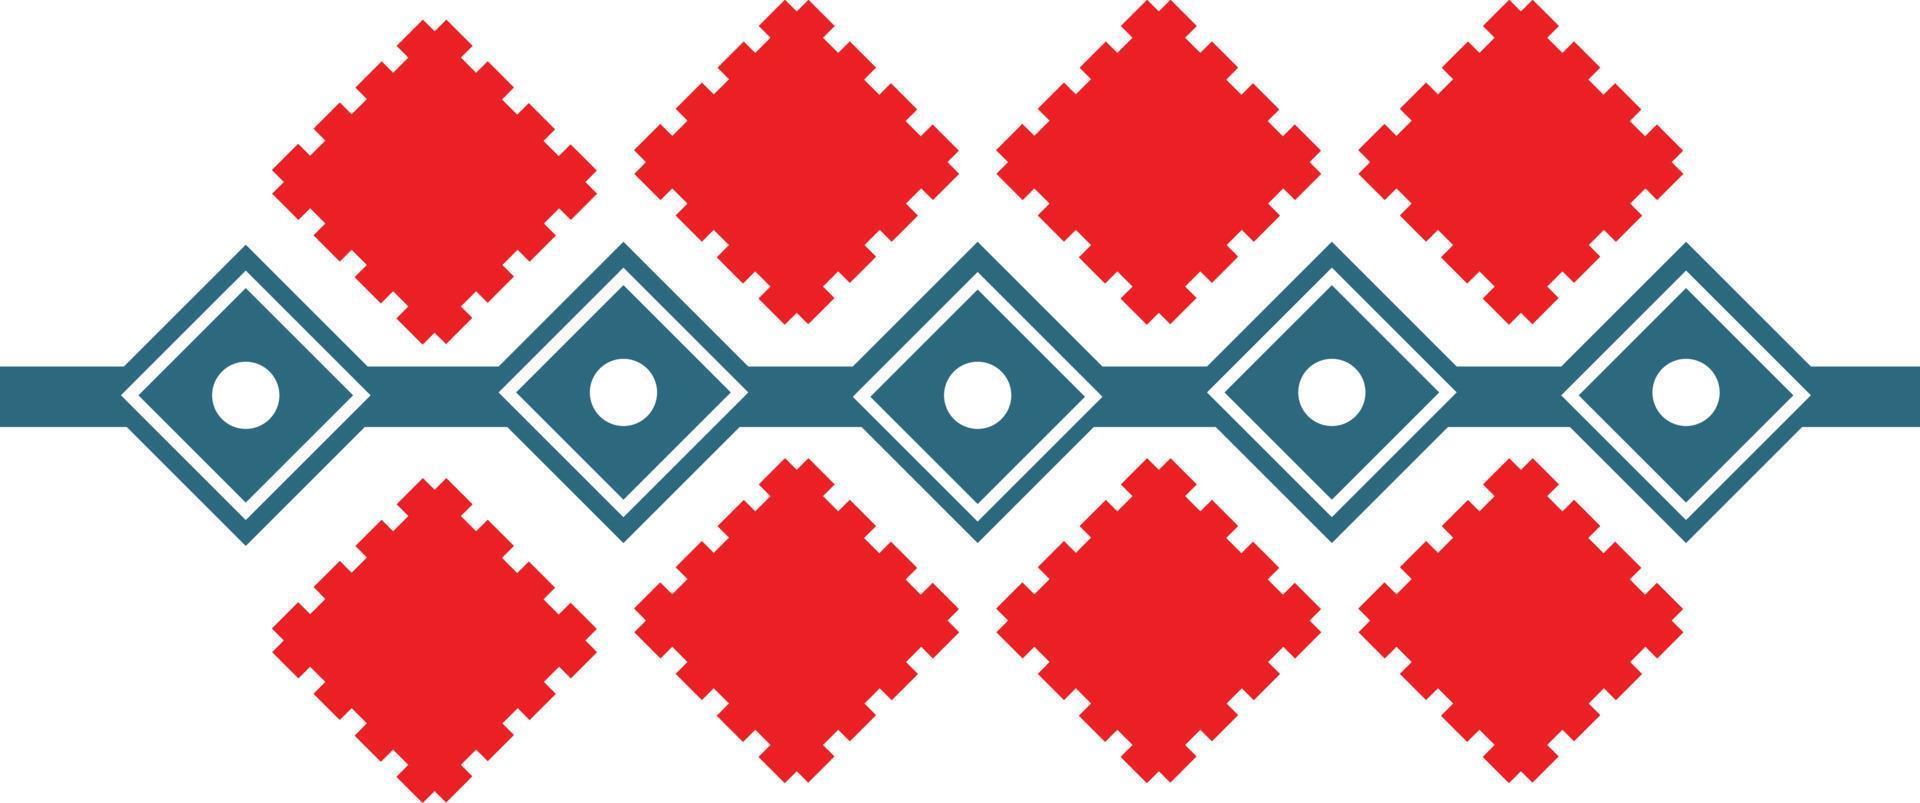 Ukrainian ethnic ornament, elements for seamless pattern, Slavic repeating pattern vector